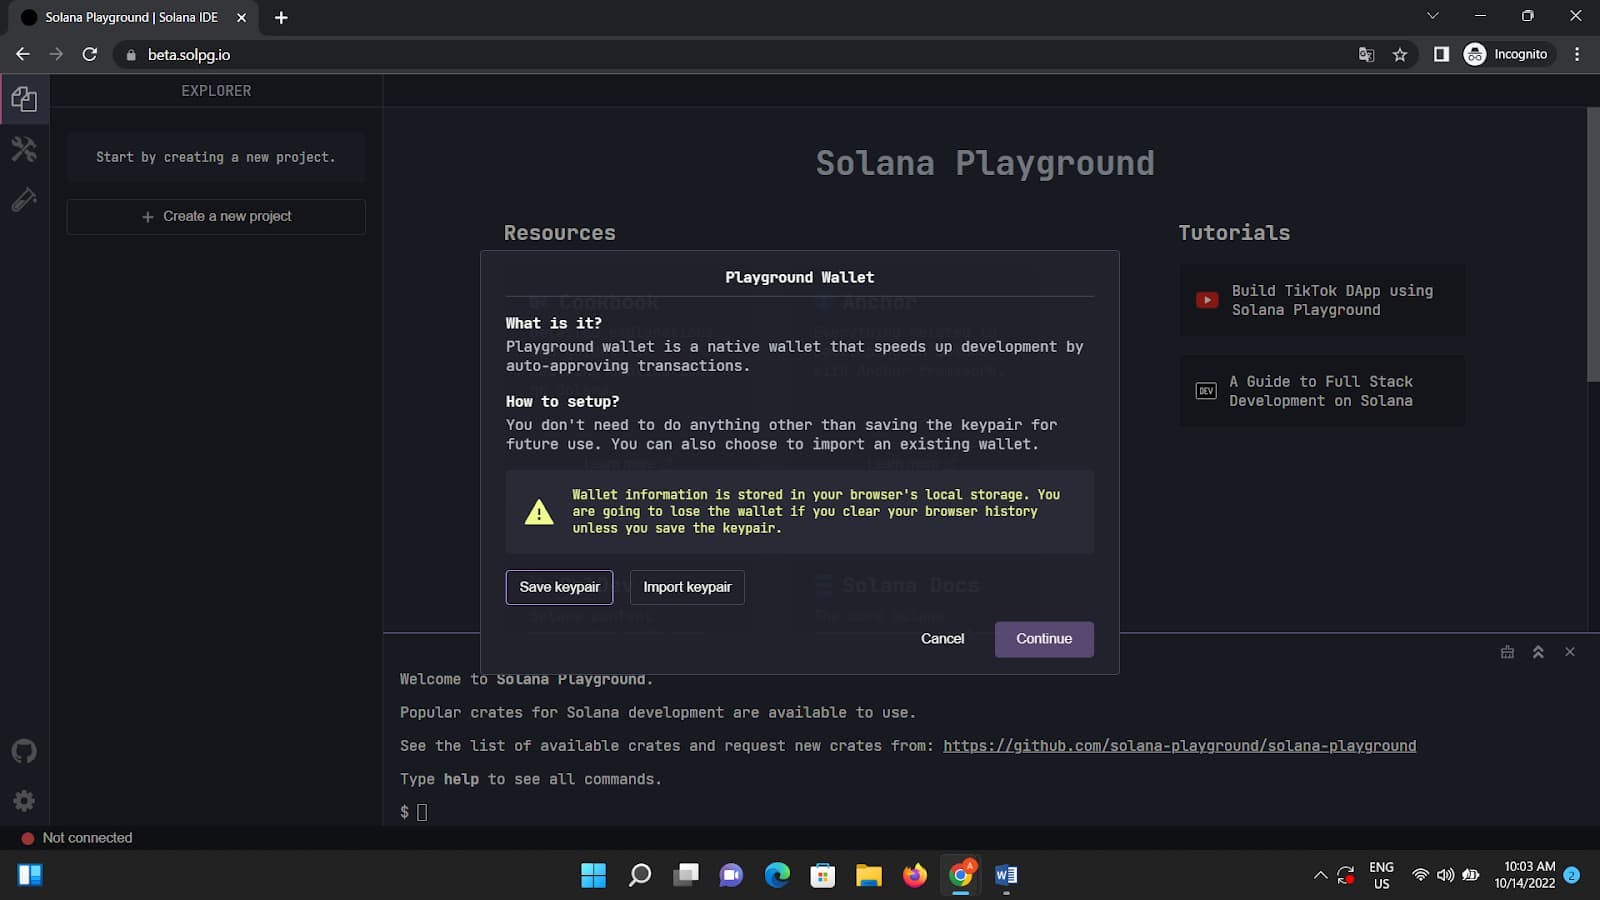 Solana Playground interface for creating a new Playground Wallet